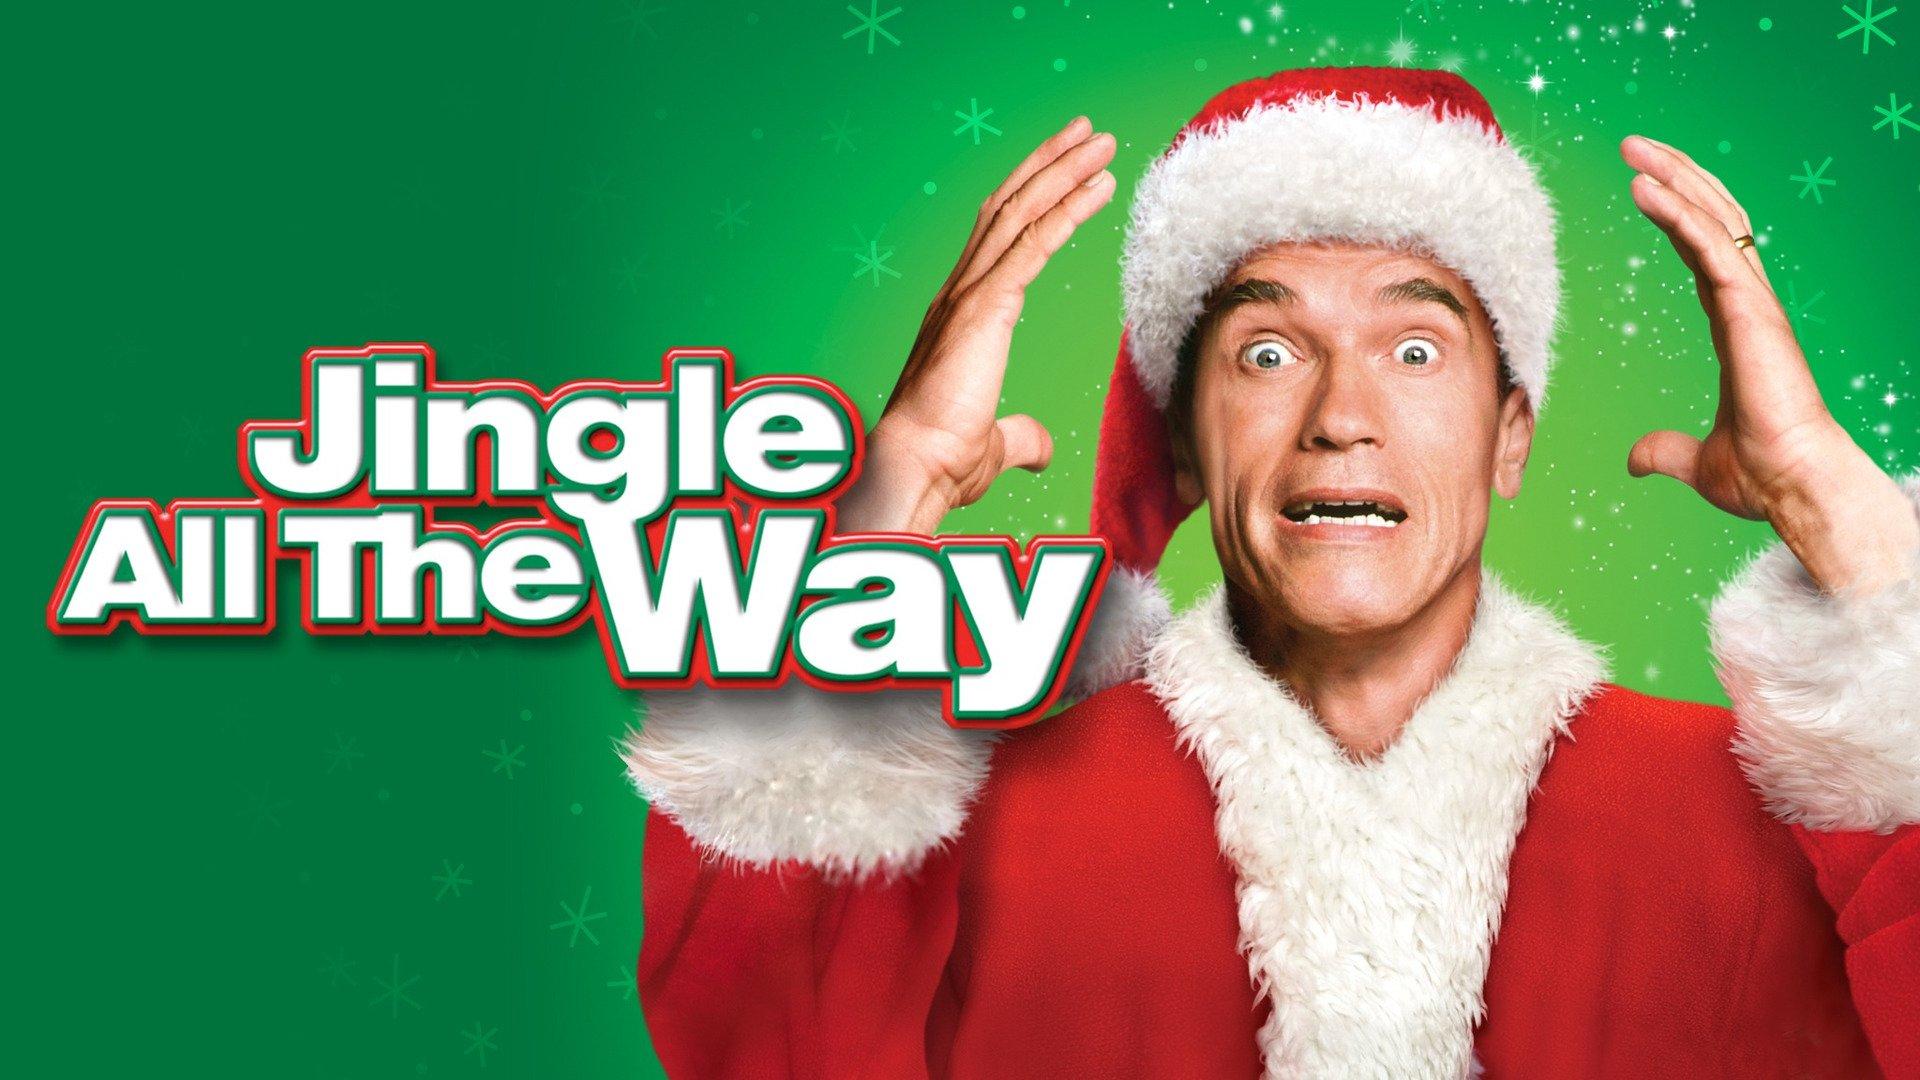 Watch Jingle All the Way Streaming Online on Philo (Free Trial)